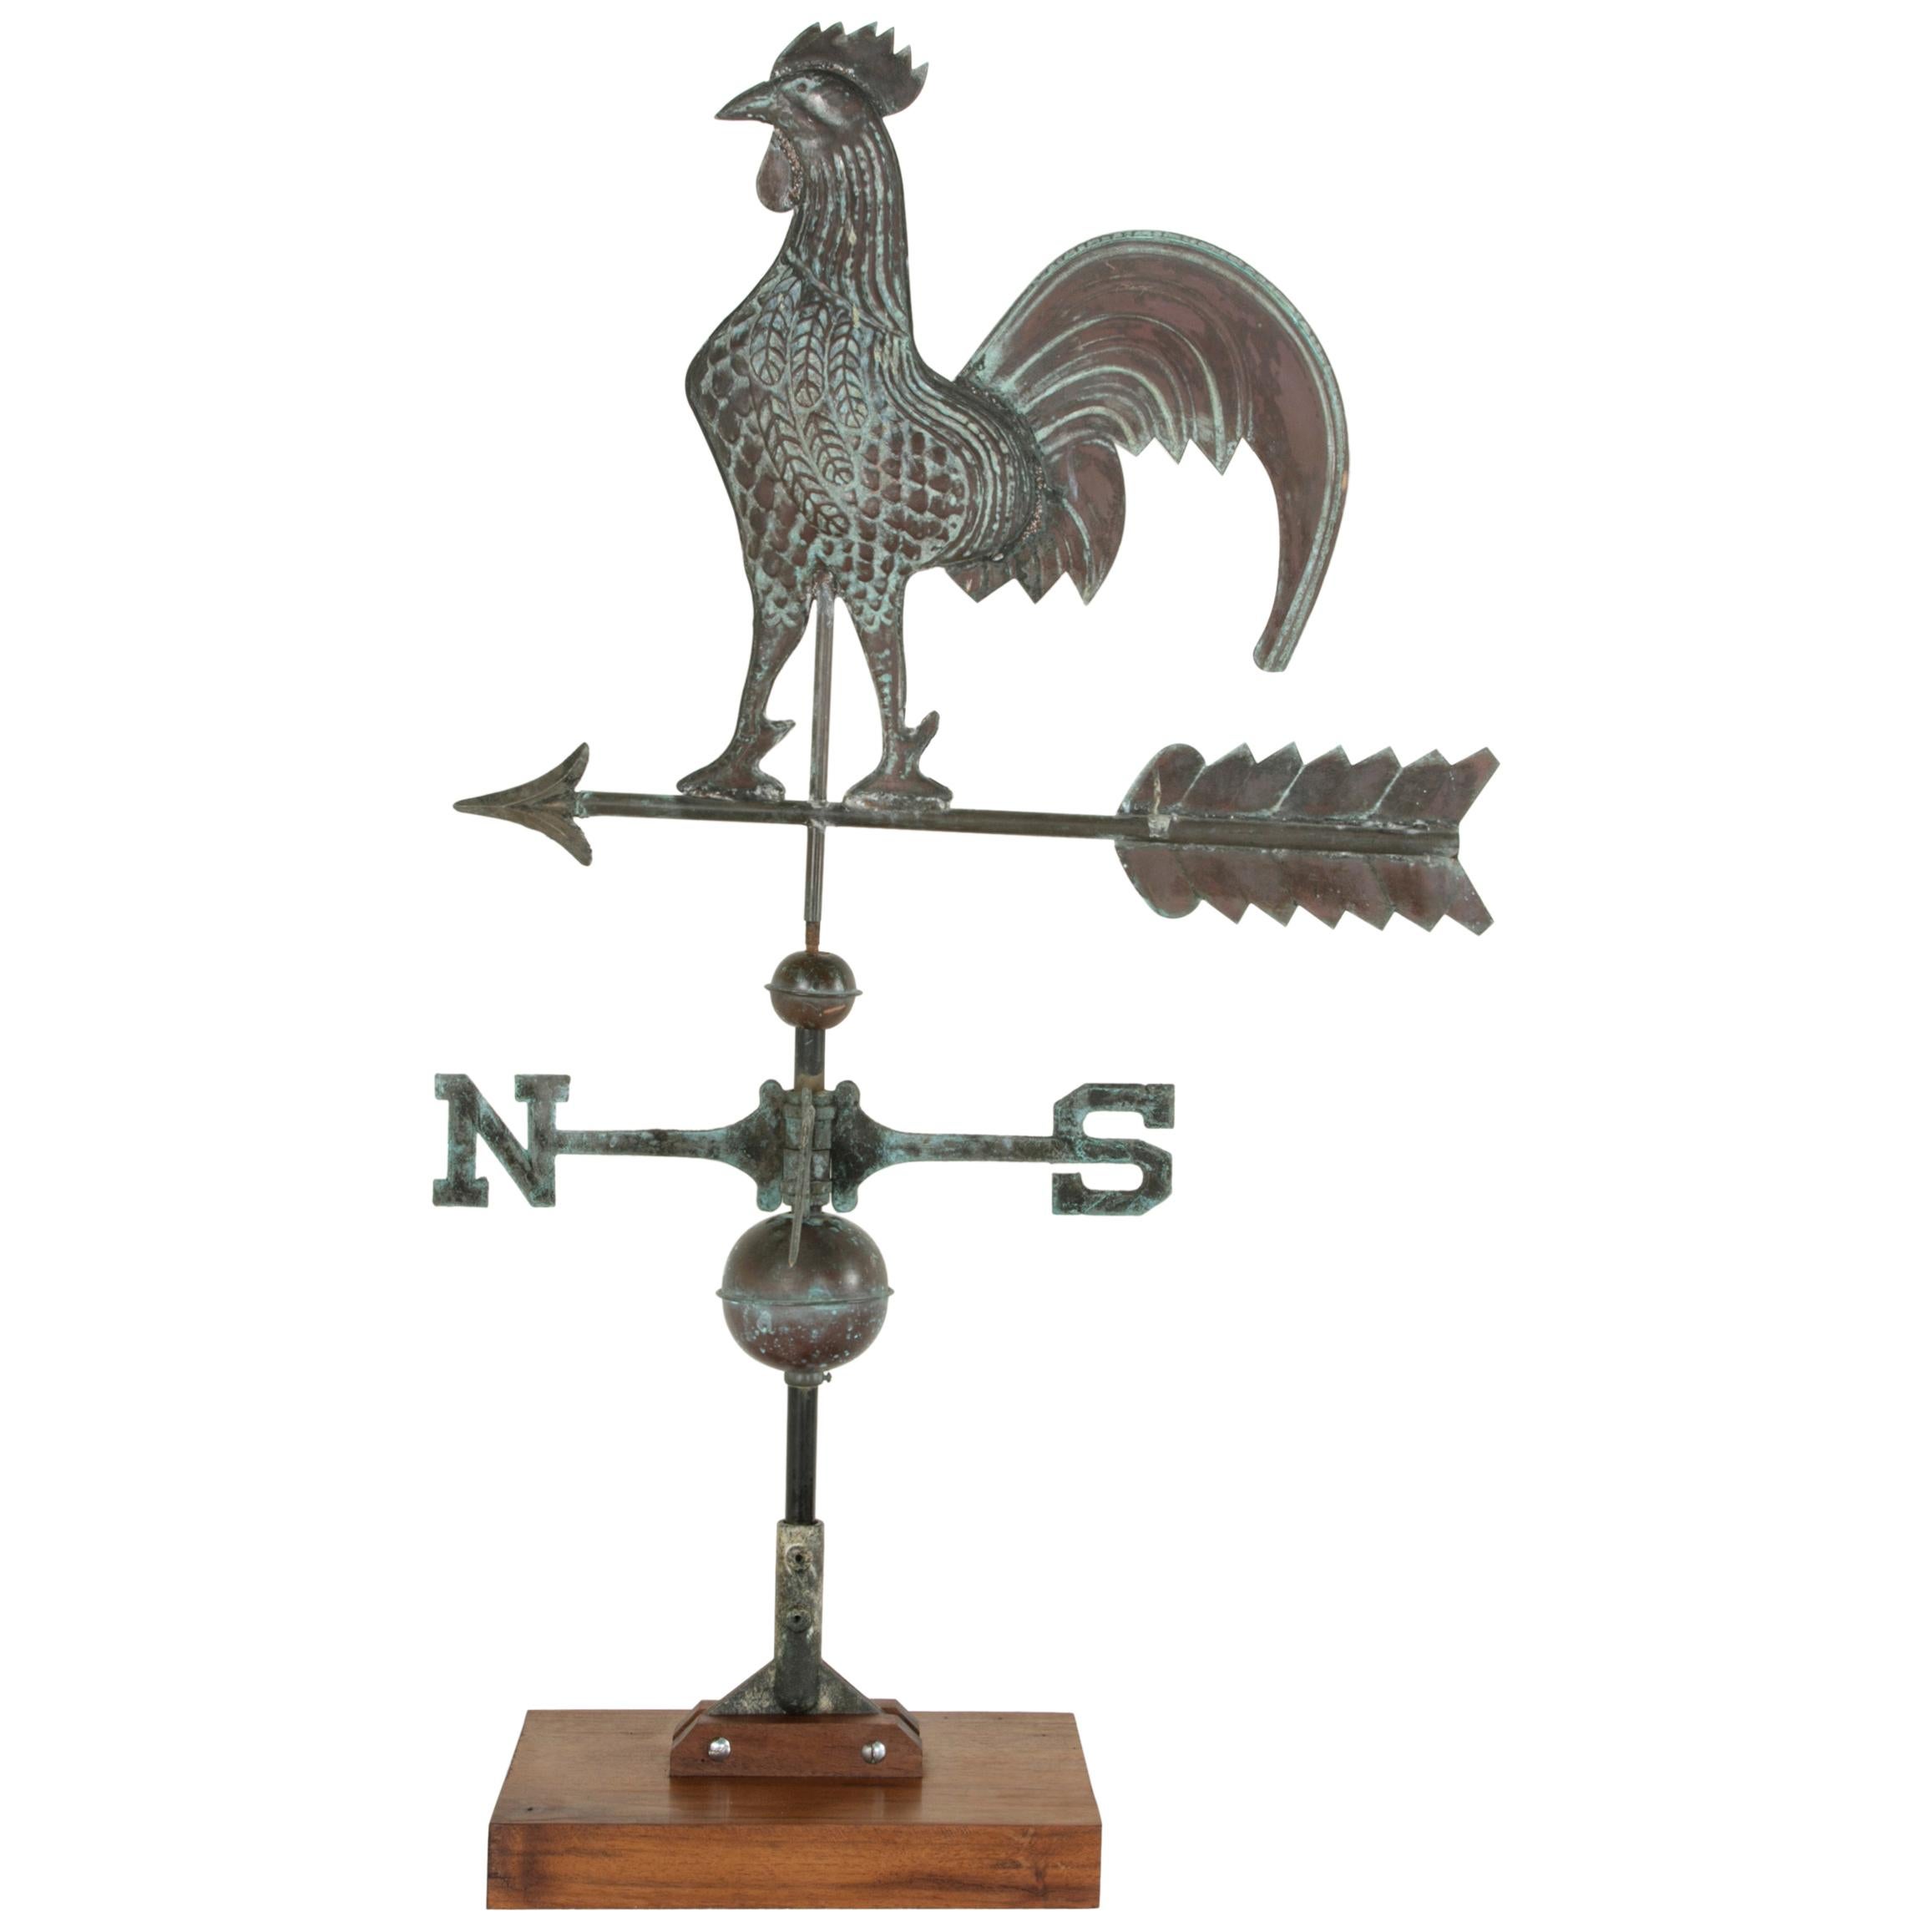 Early 20th Century English Patinated Copper Rooster Weather Vane on Walnut Base